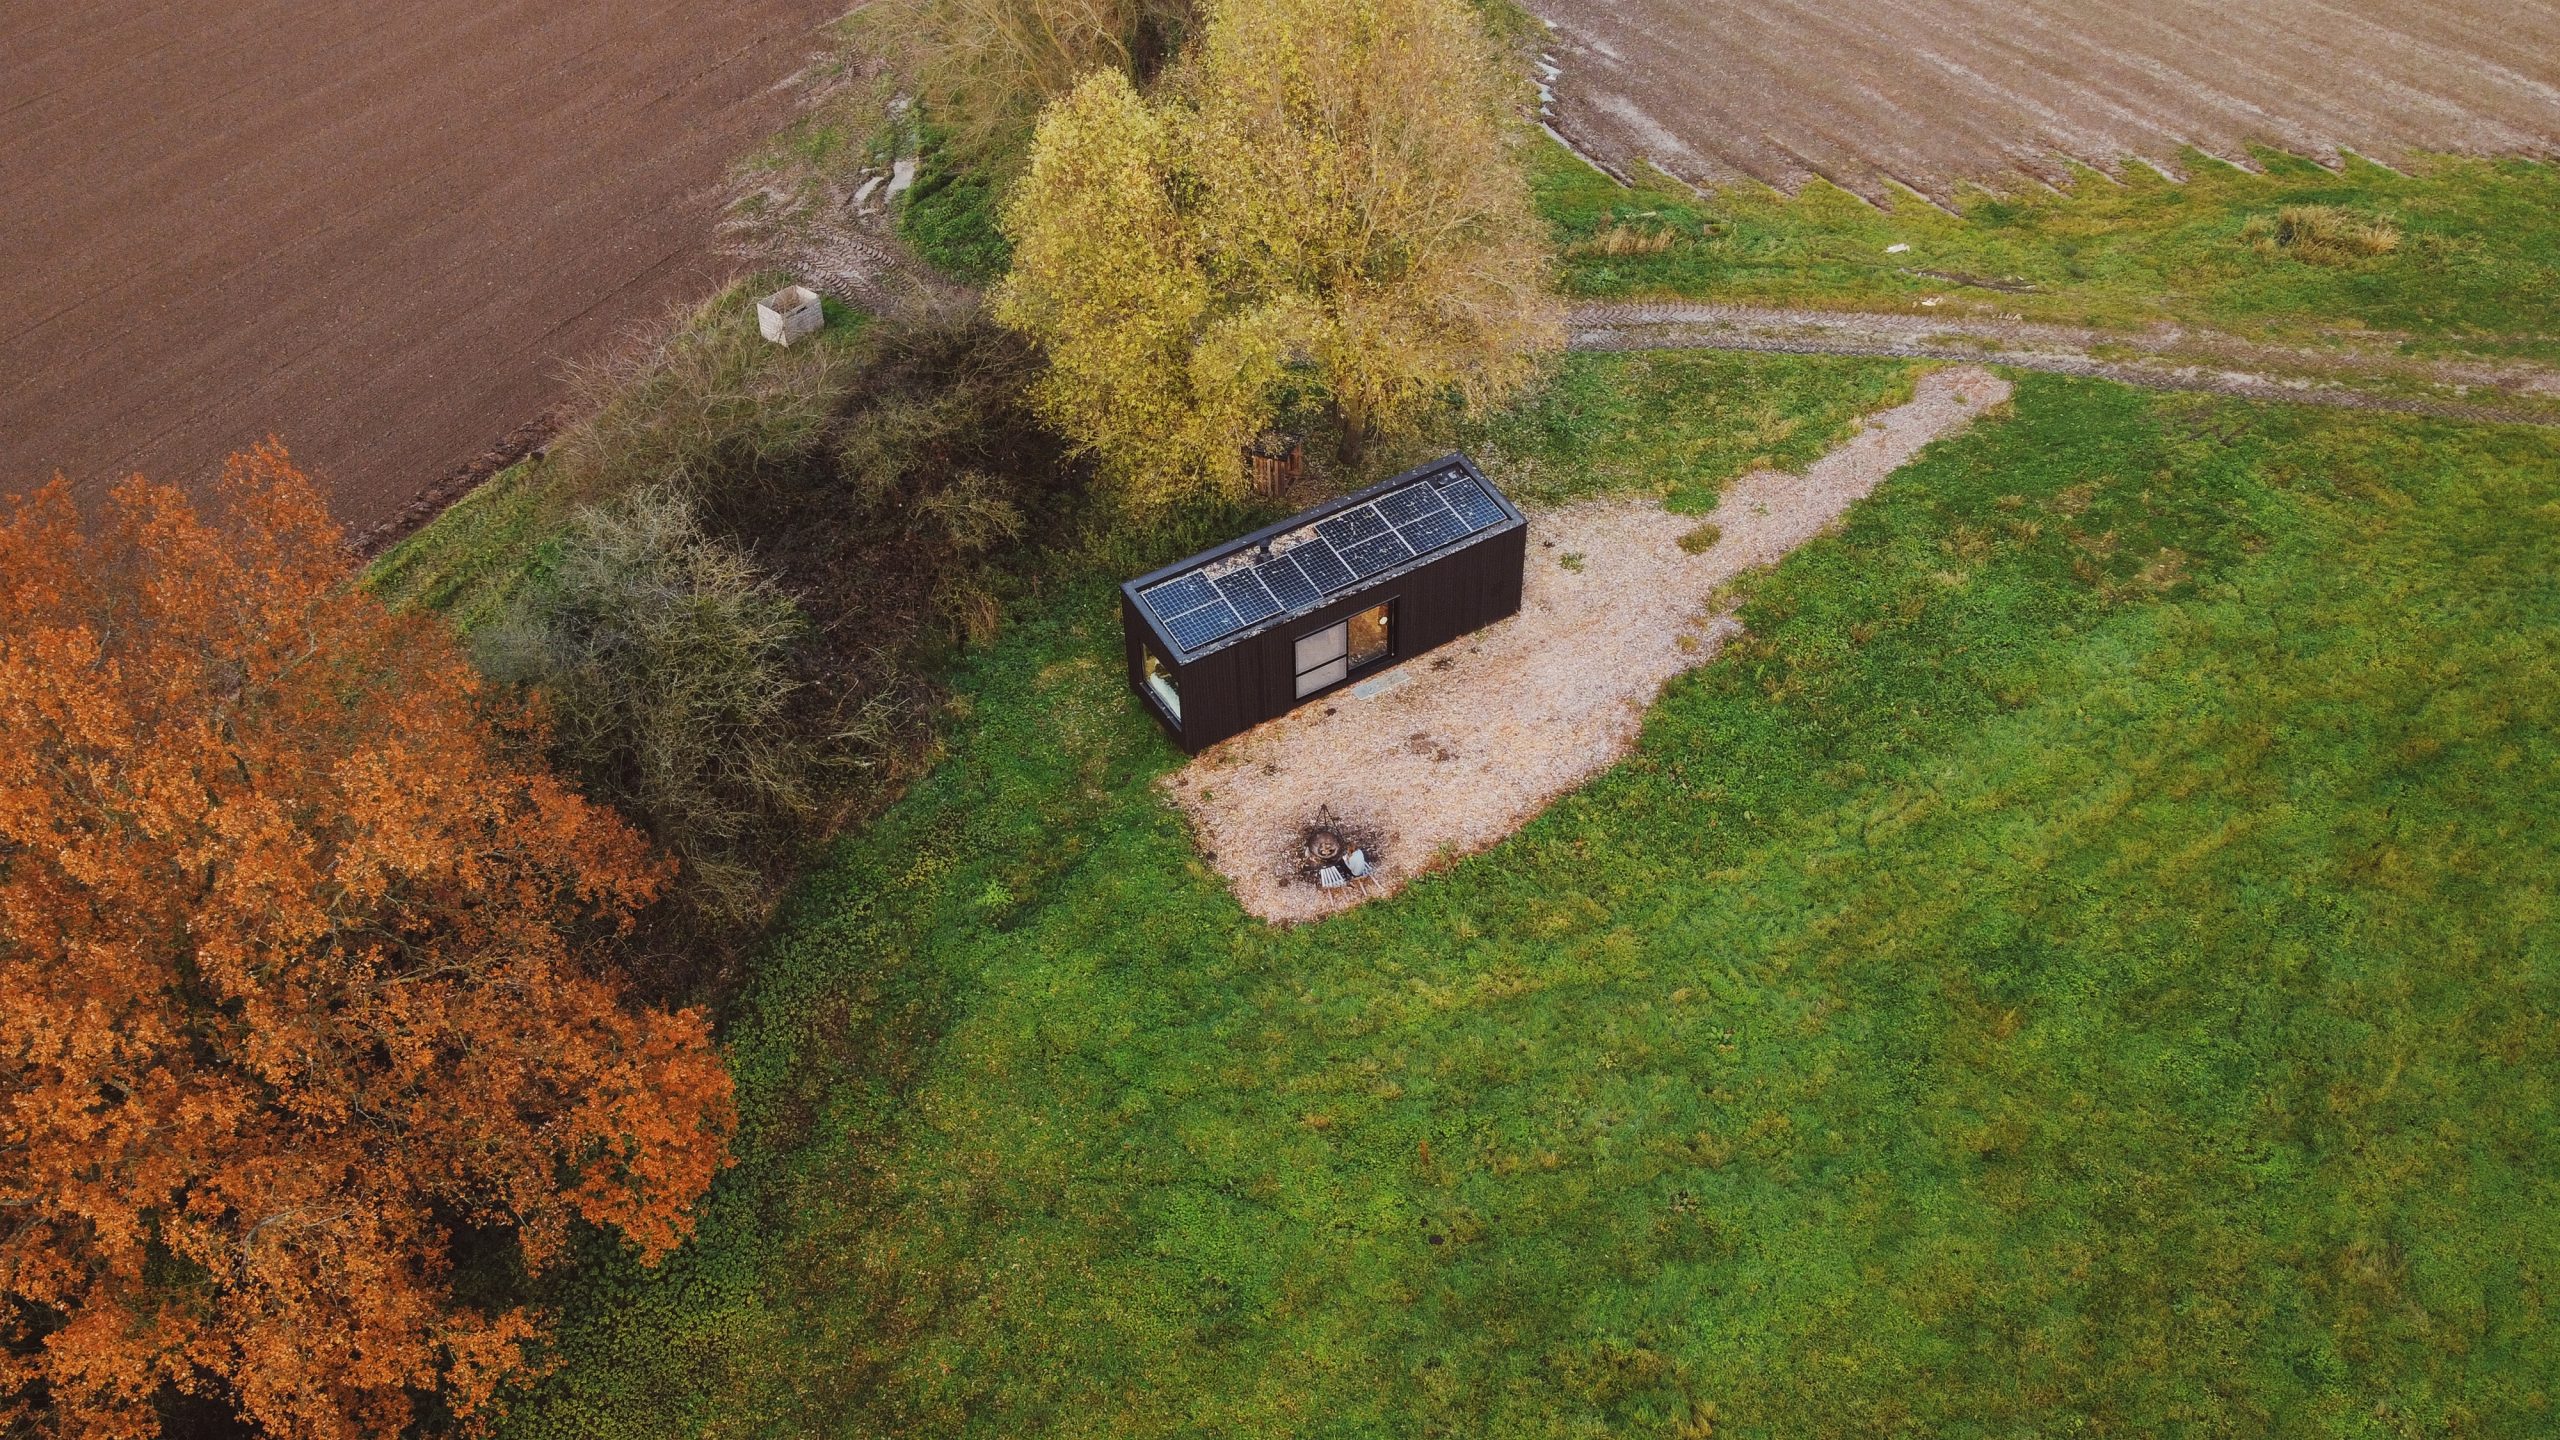 view from above of the slow cabin and fields surrounding it